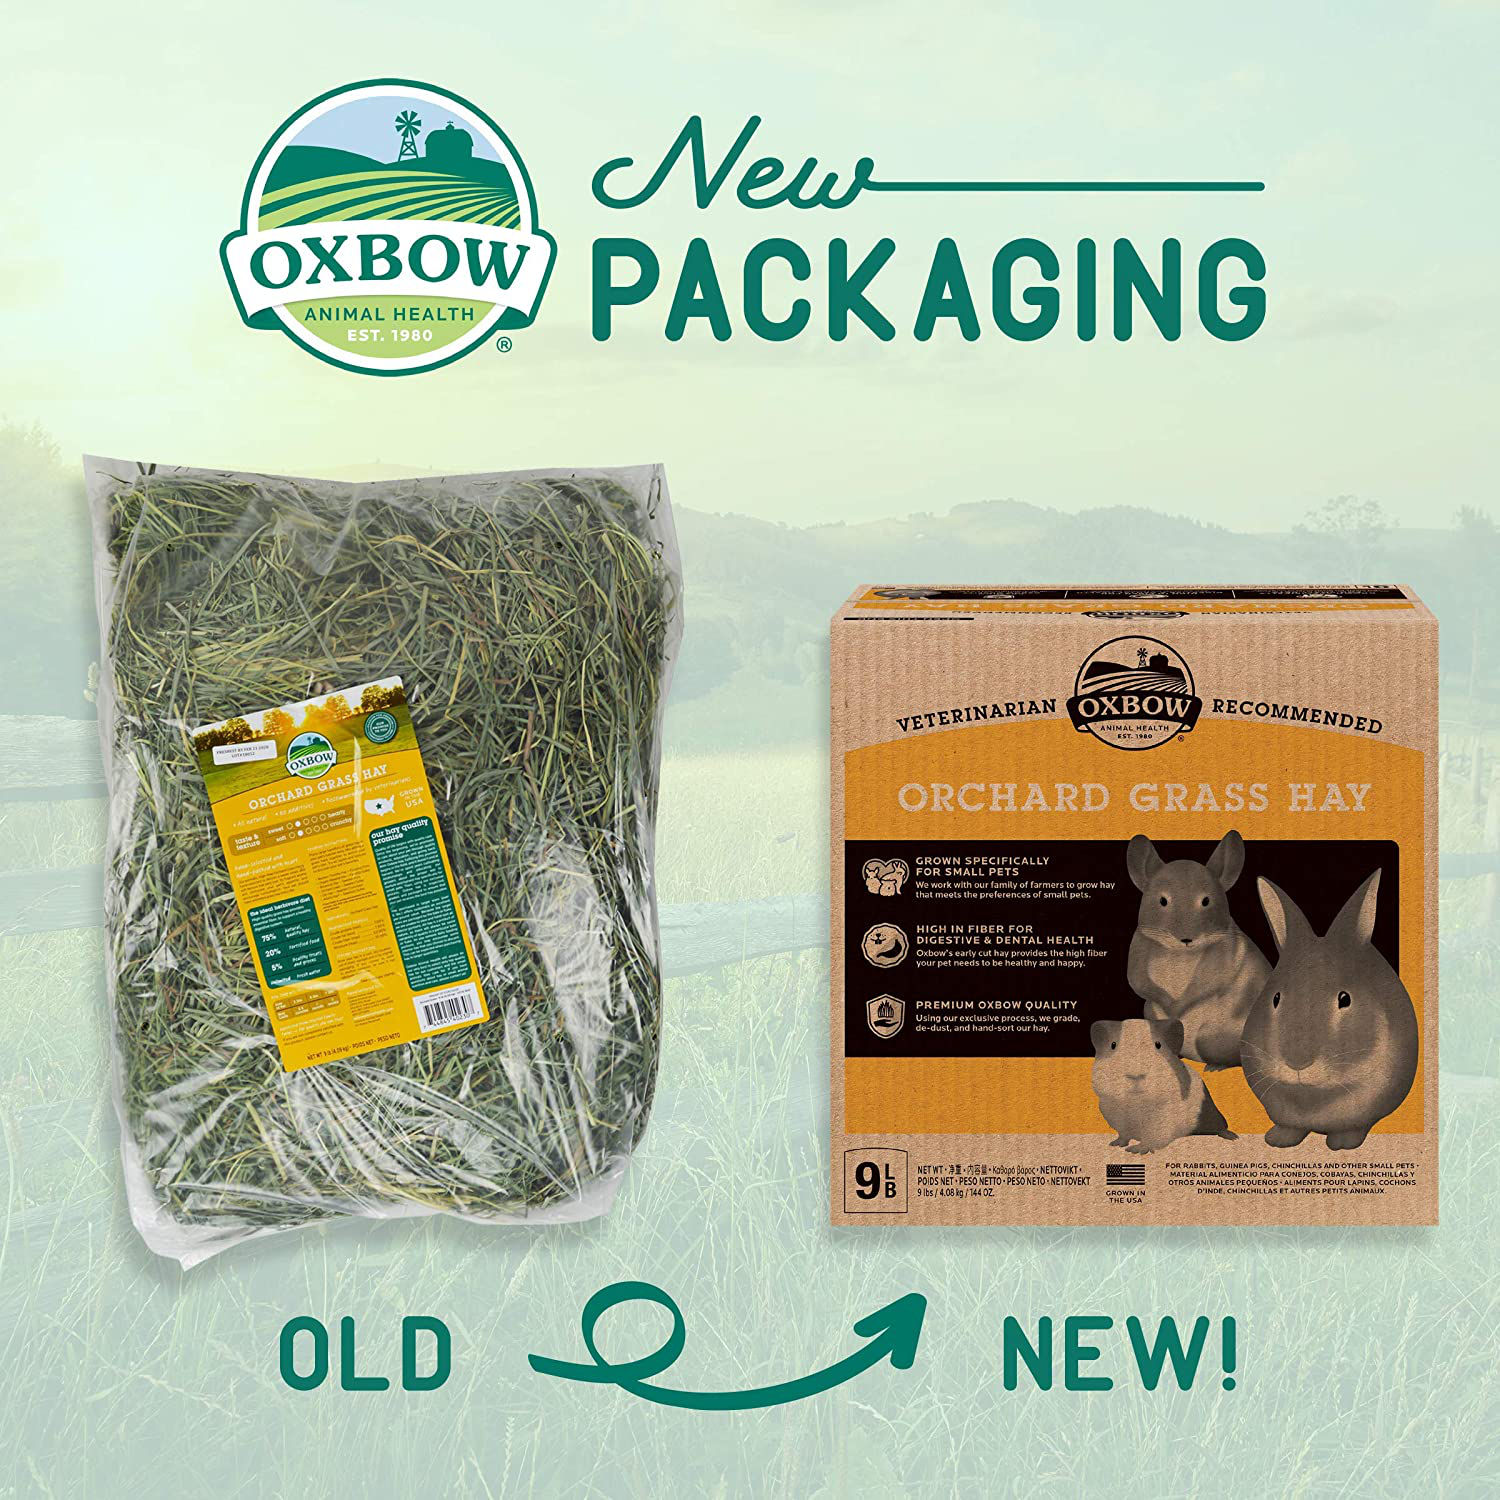 Oxbow Animal Health Orchard Grass Hay - All Natural Grass Hay for Chinchillas, Rabbits, Guinea Pigs, Hamsters & Gerbils